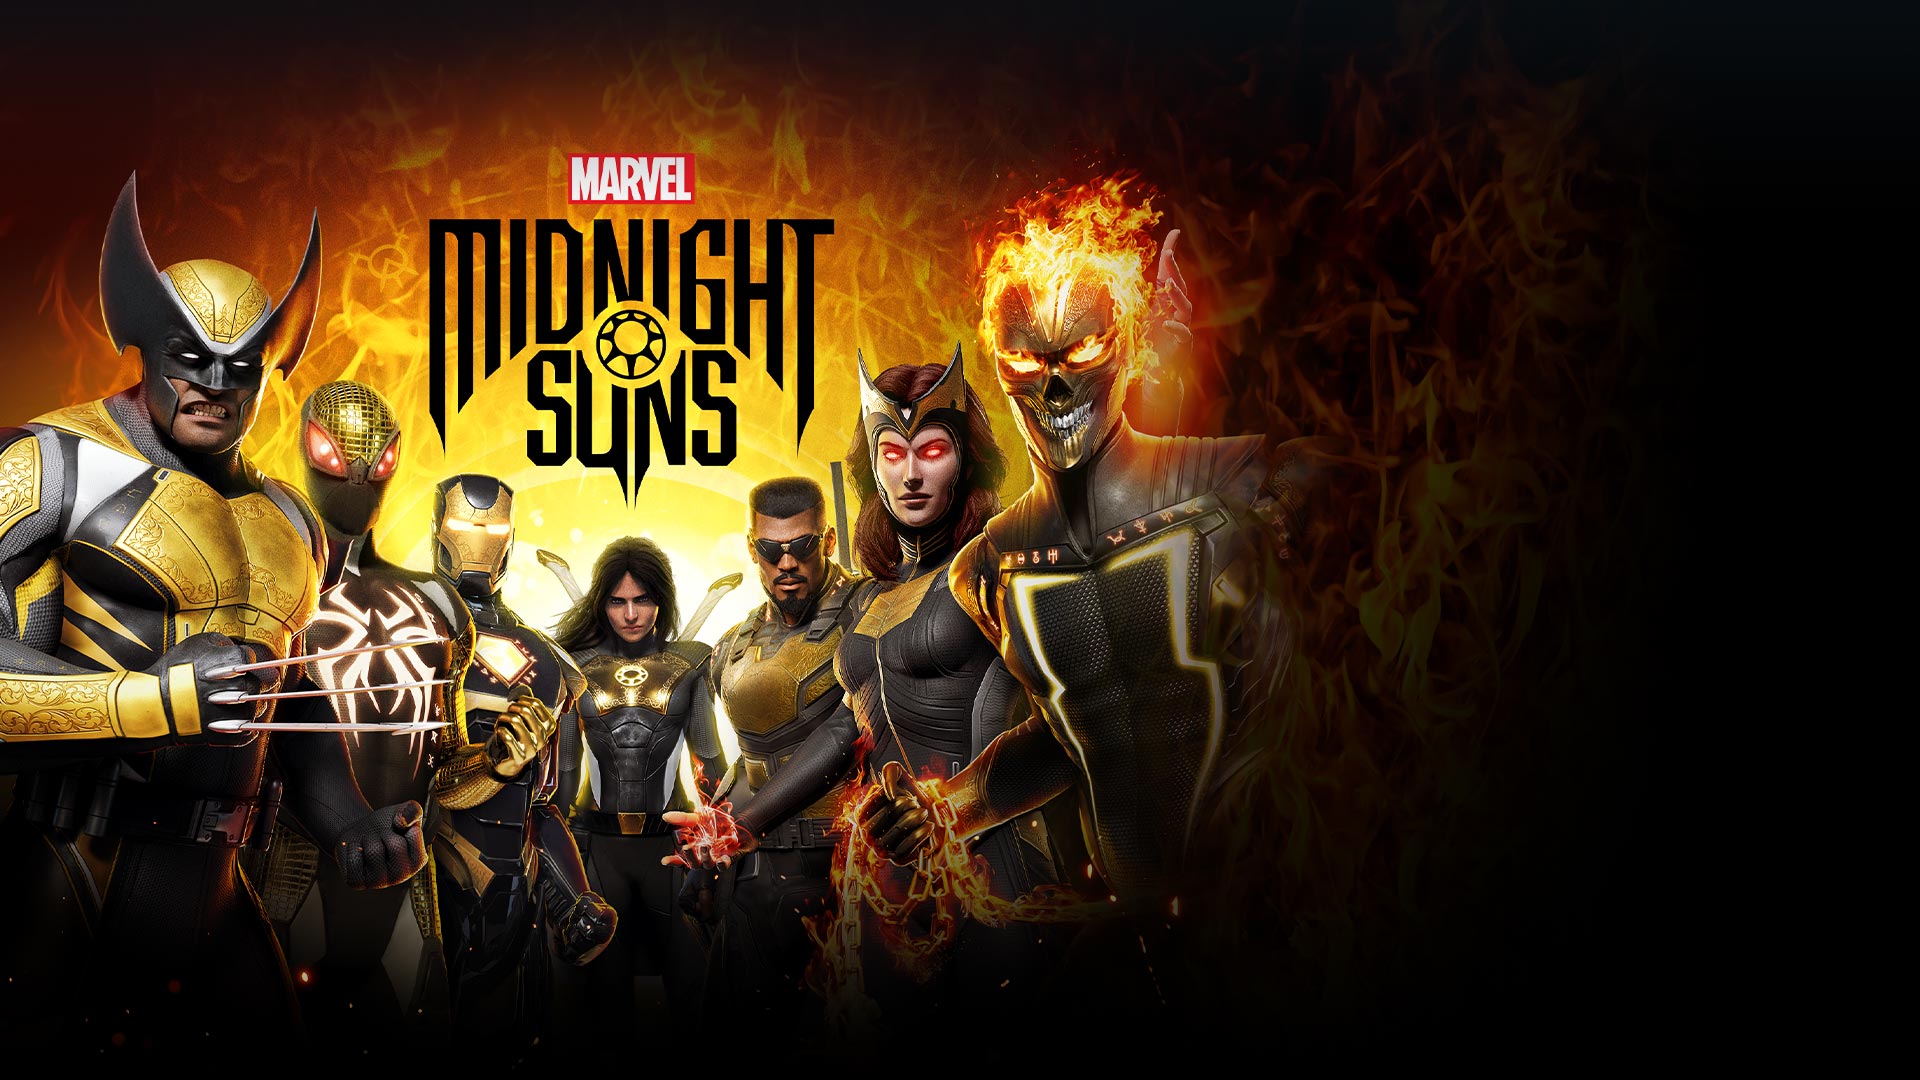 Marvel Midnight Suns, a group of super heroes including Wolverine, Ironman, Ghost Rider, and Blade.